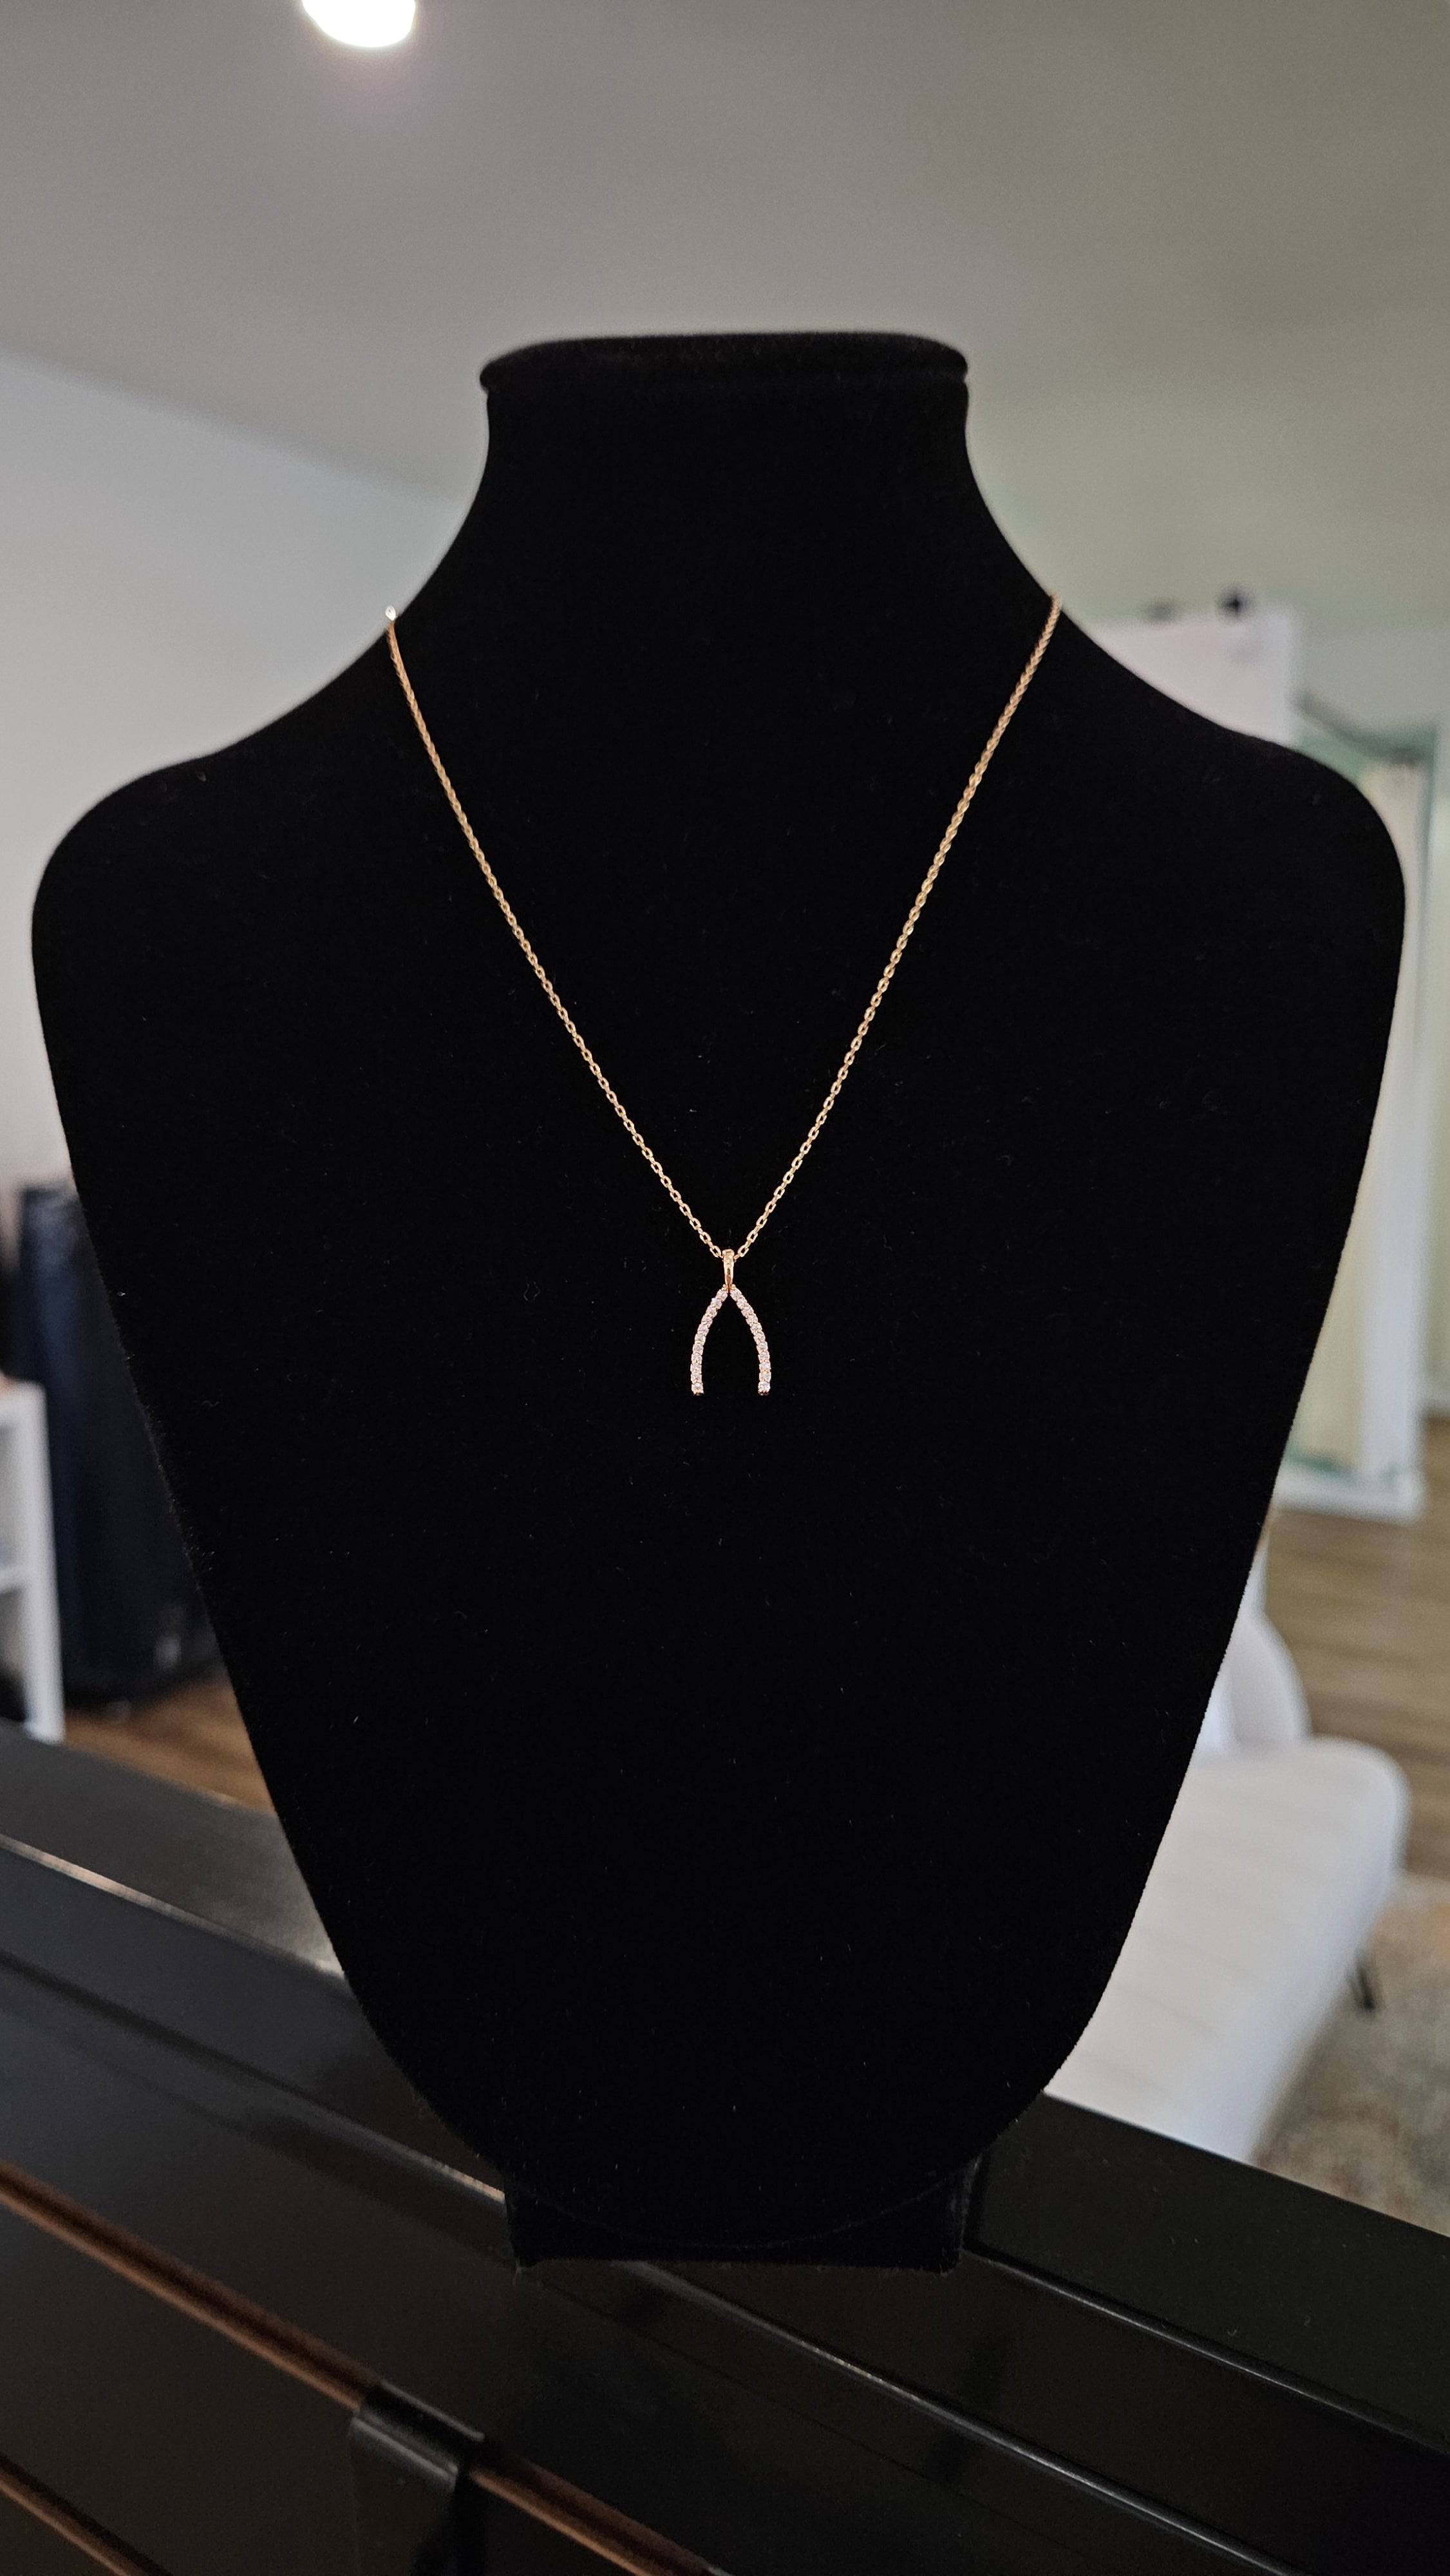 Shop Pave Wishbone Necklace-Necklaces at Ruby Joy Boutique, a Women's Clothing Store in Pickerington, Ohio